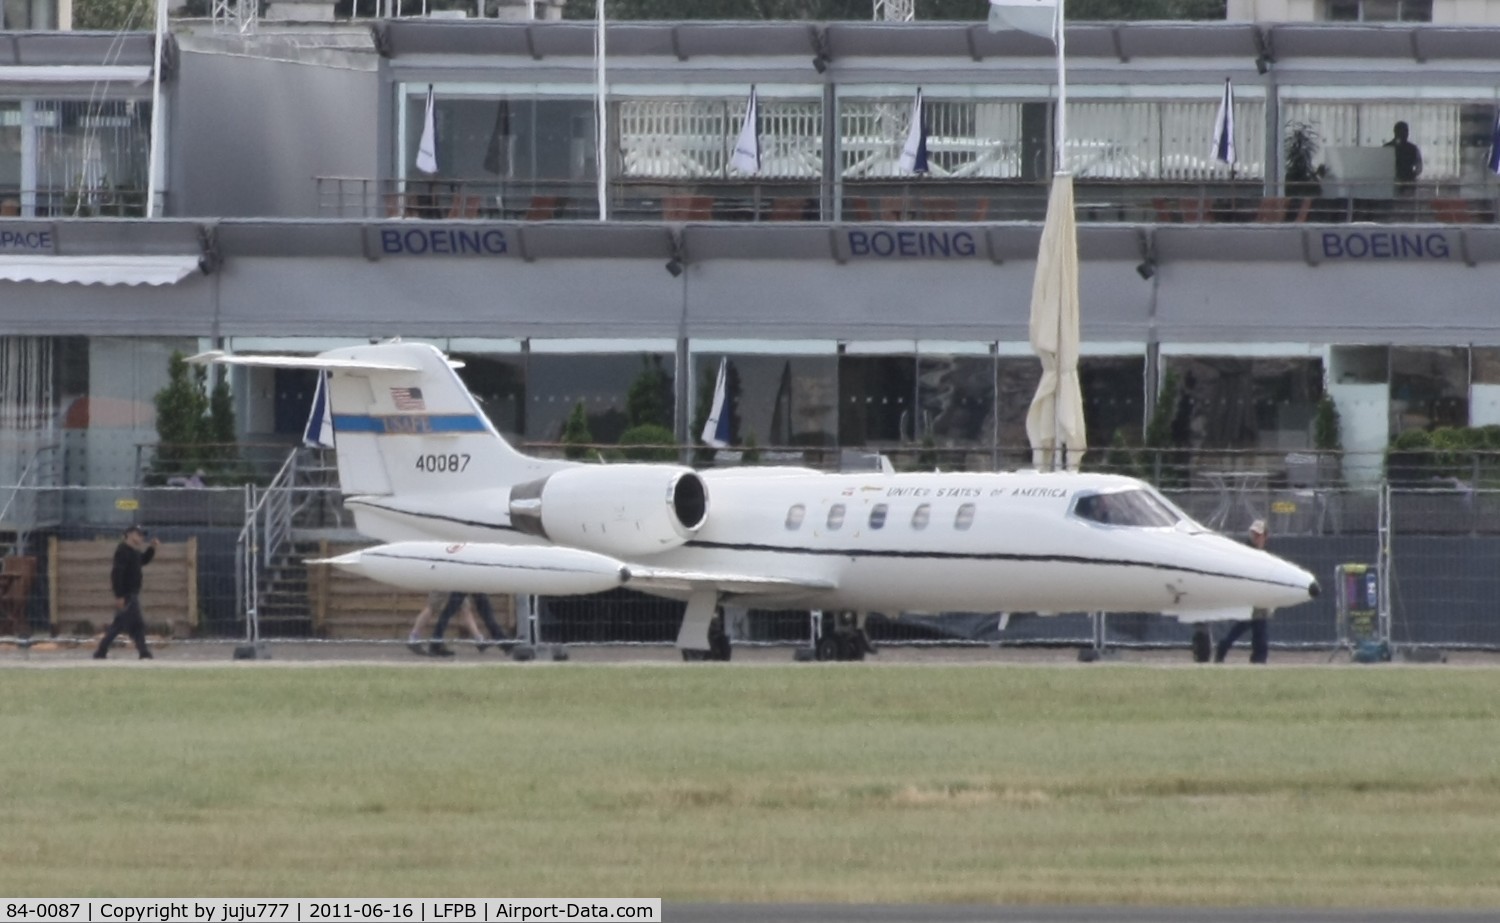 84-0087, 1984 Gates Learjet C-21A C/N 35A-533, on transit at Le Bourget